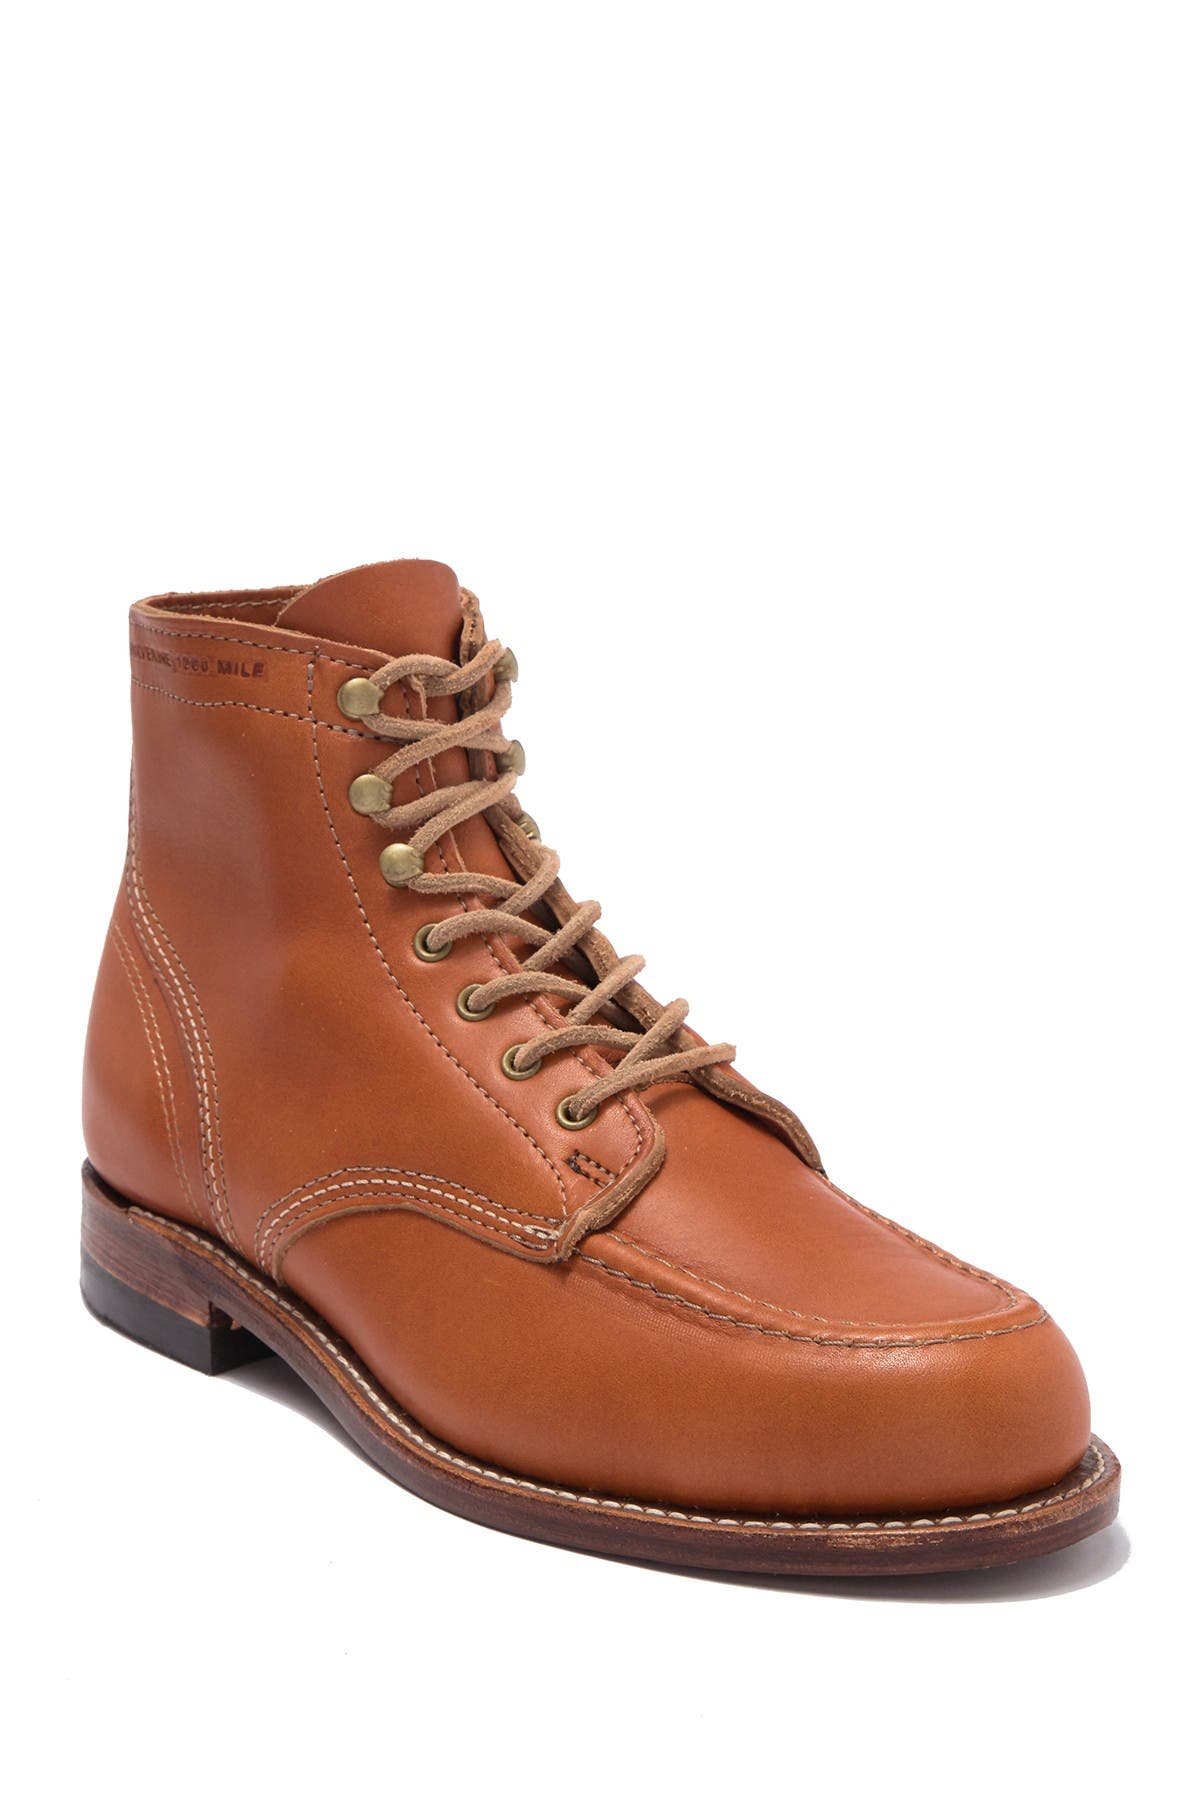 wolverine leather boots